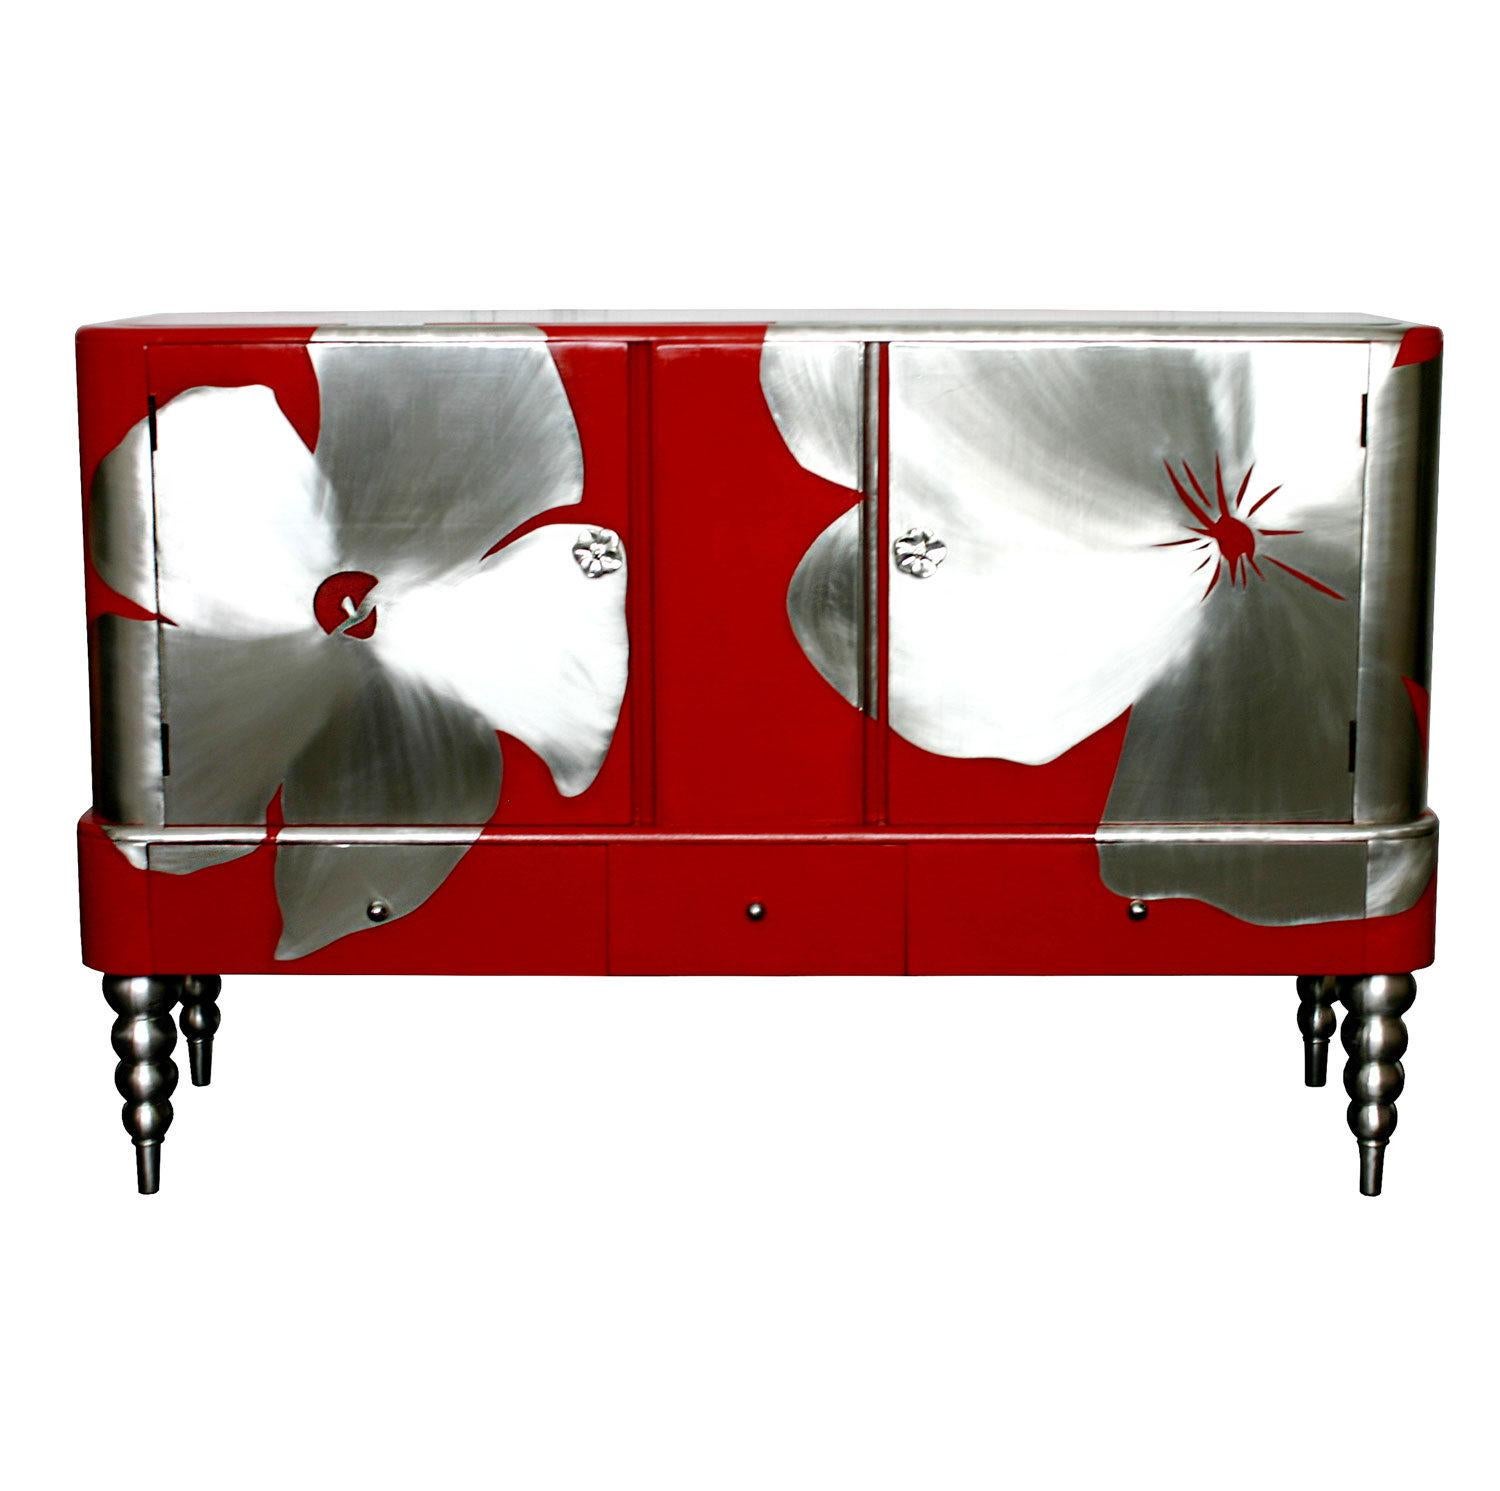 A mid-century sideboard that has been reconditioned and reimagined by designer and maker Kate Noakes using a unique process that Kate has developed of drawing and cutting her original designs in sheet metal, that are applied onto existing furniture